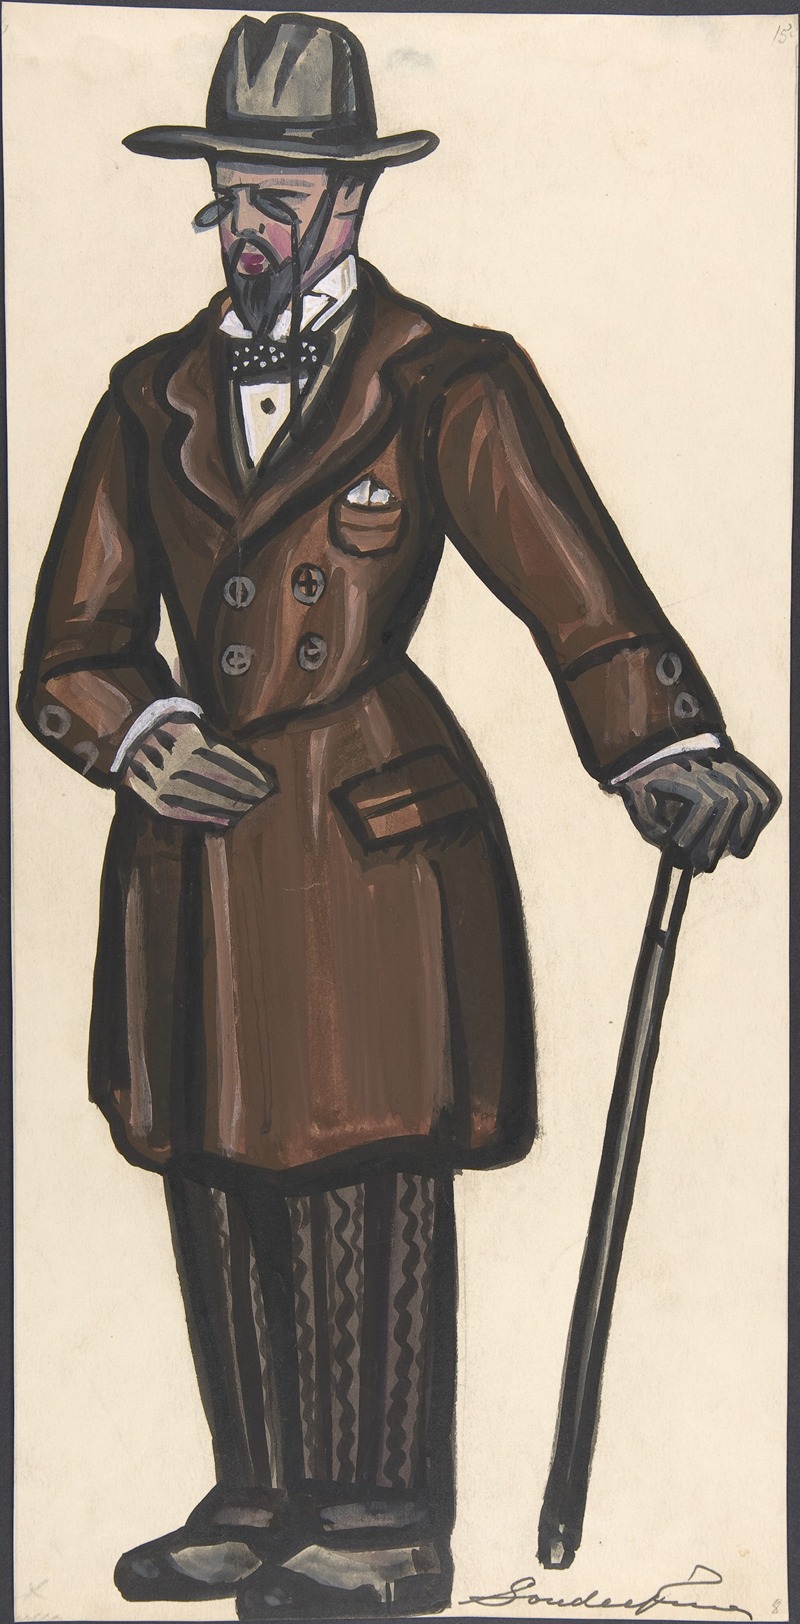 Sergey Yurievich Sudeikin - Man wearing a brown overcoat, cane and pince-nez